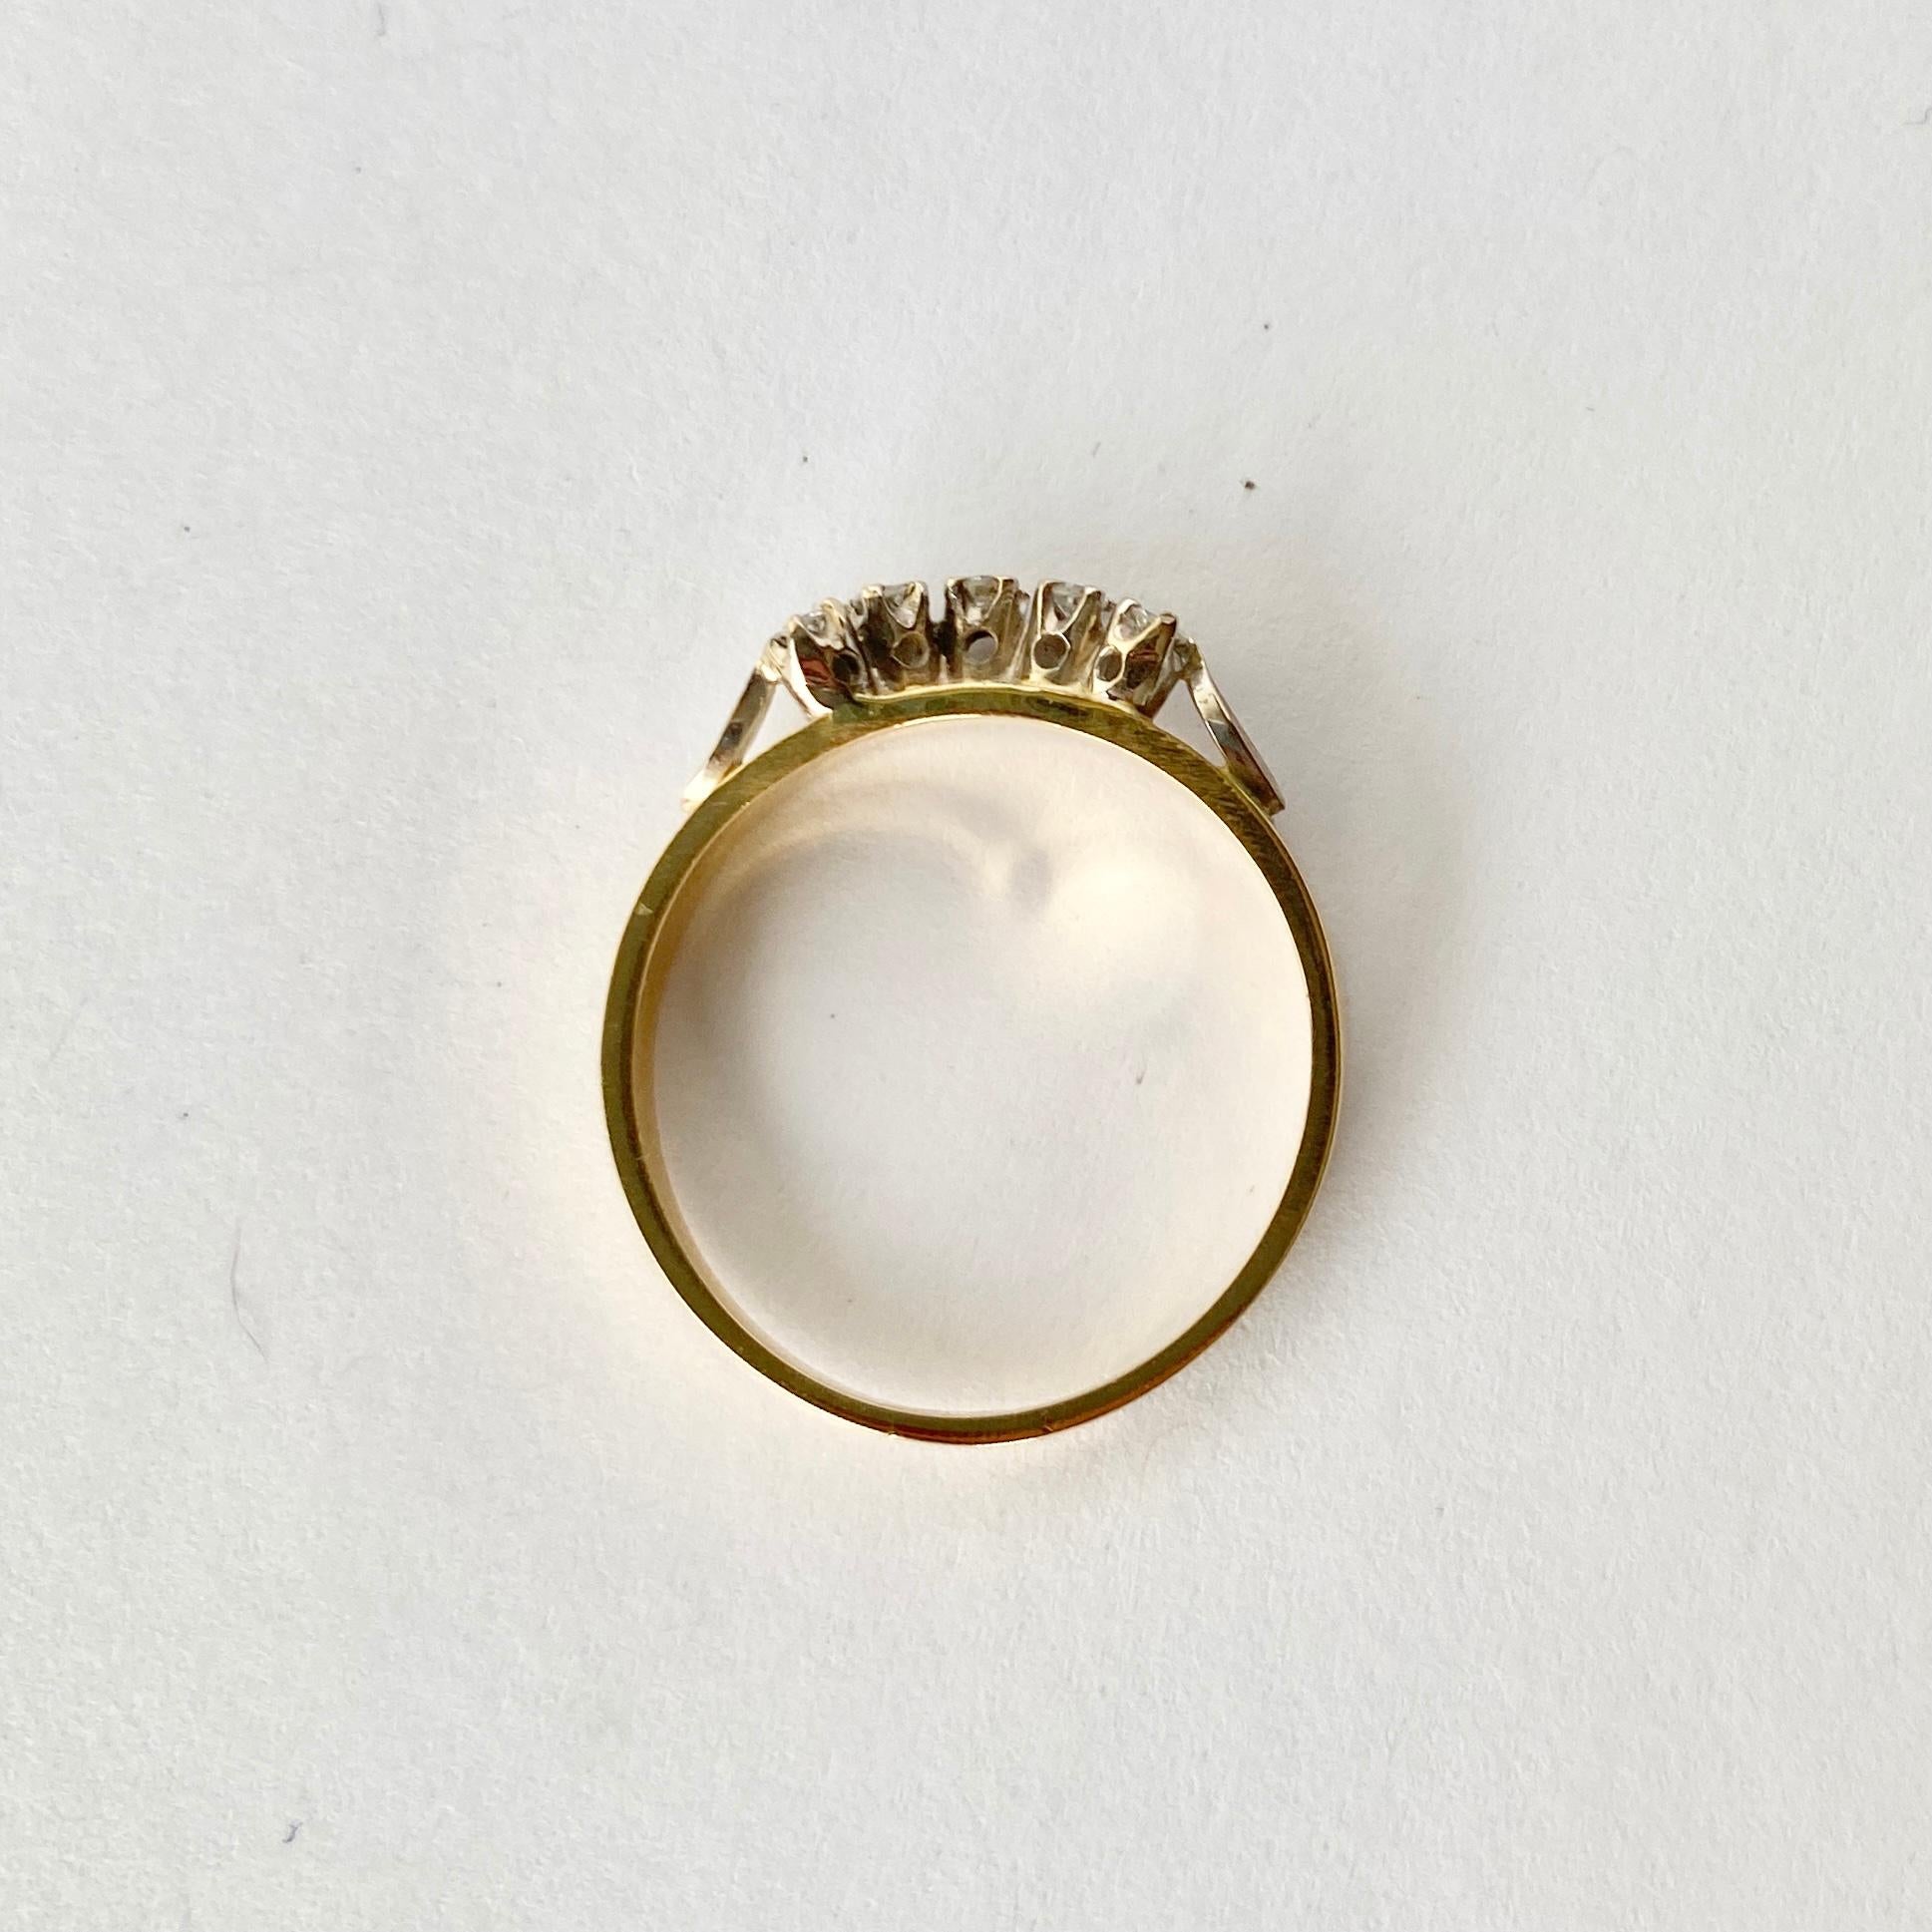 This 18carat gold band has a curved row of diamonds sitting on top which would perfectly hug a round faced ring or you could wear alone. The half halo of diamonds total 15pts.

Ring Size: P 1/2 or 8 
Band Width: 4mm

Width: 3.2g
